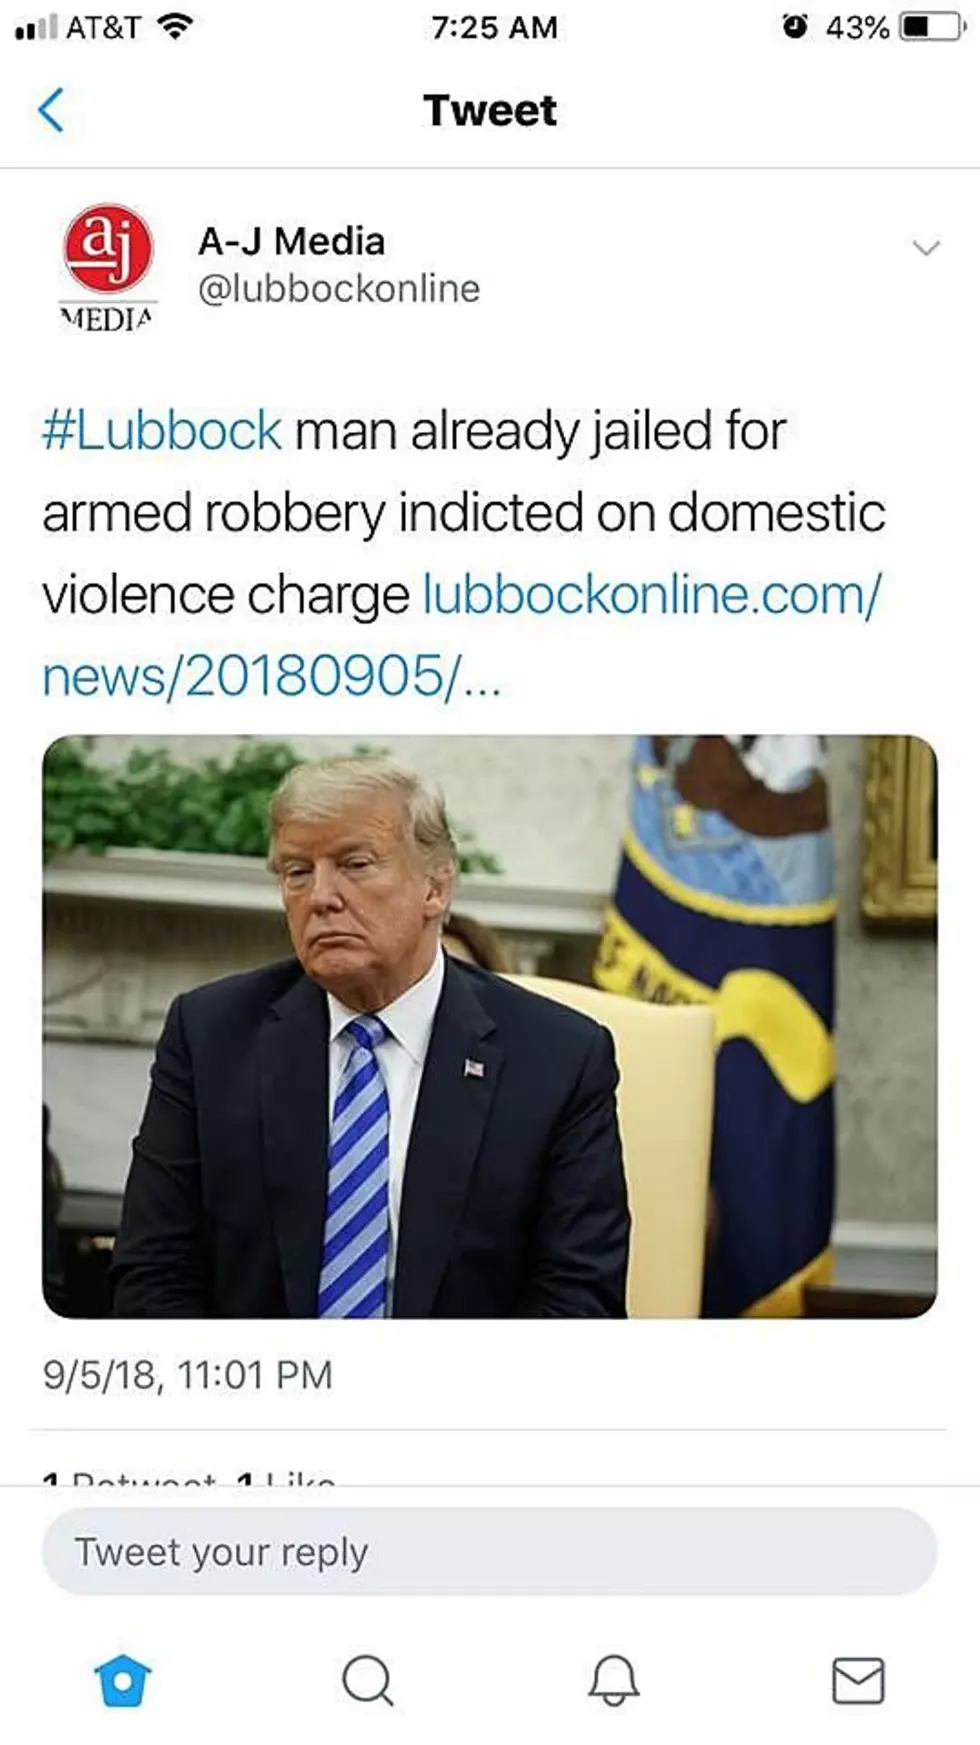 Apparently Donald Trump Is From Lubbock and Was Arrested